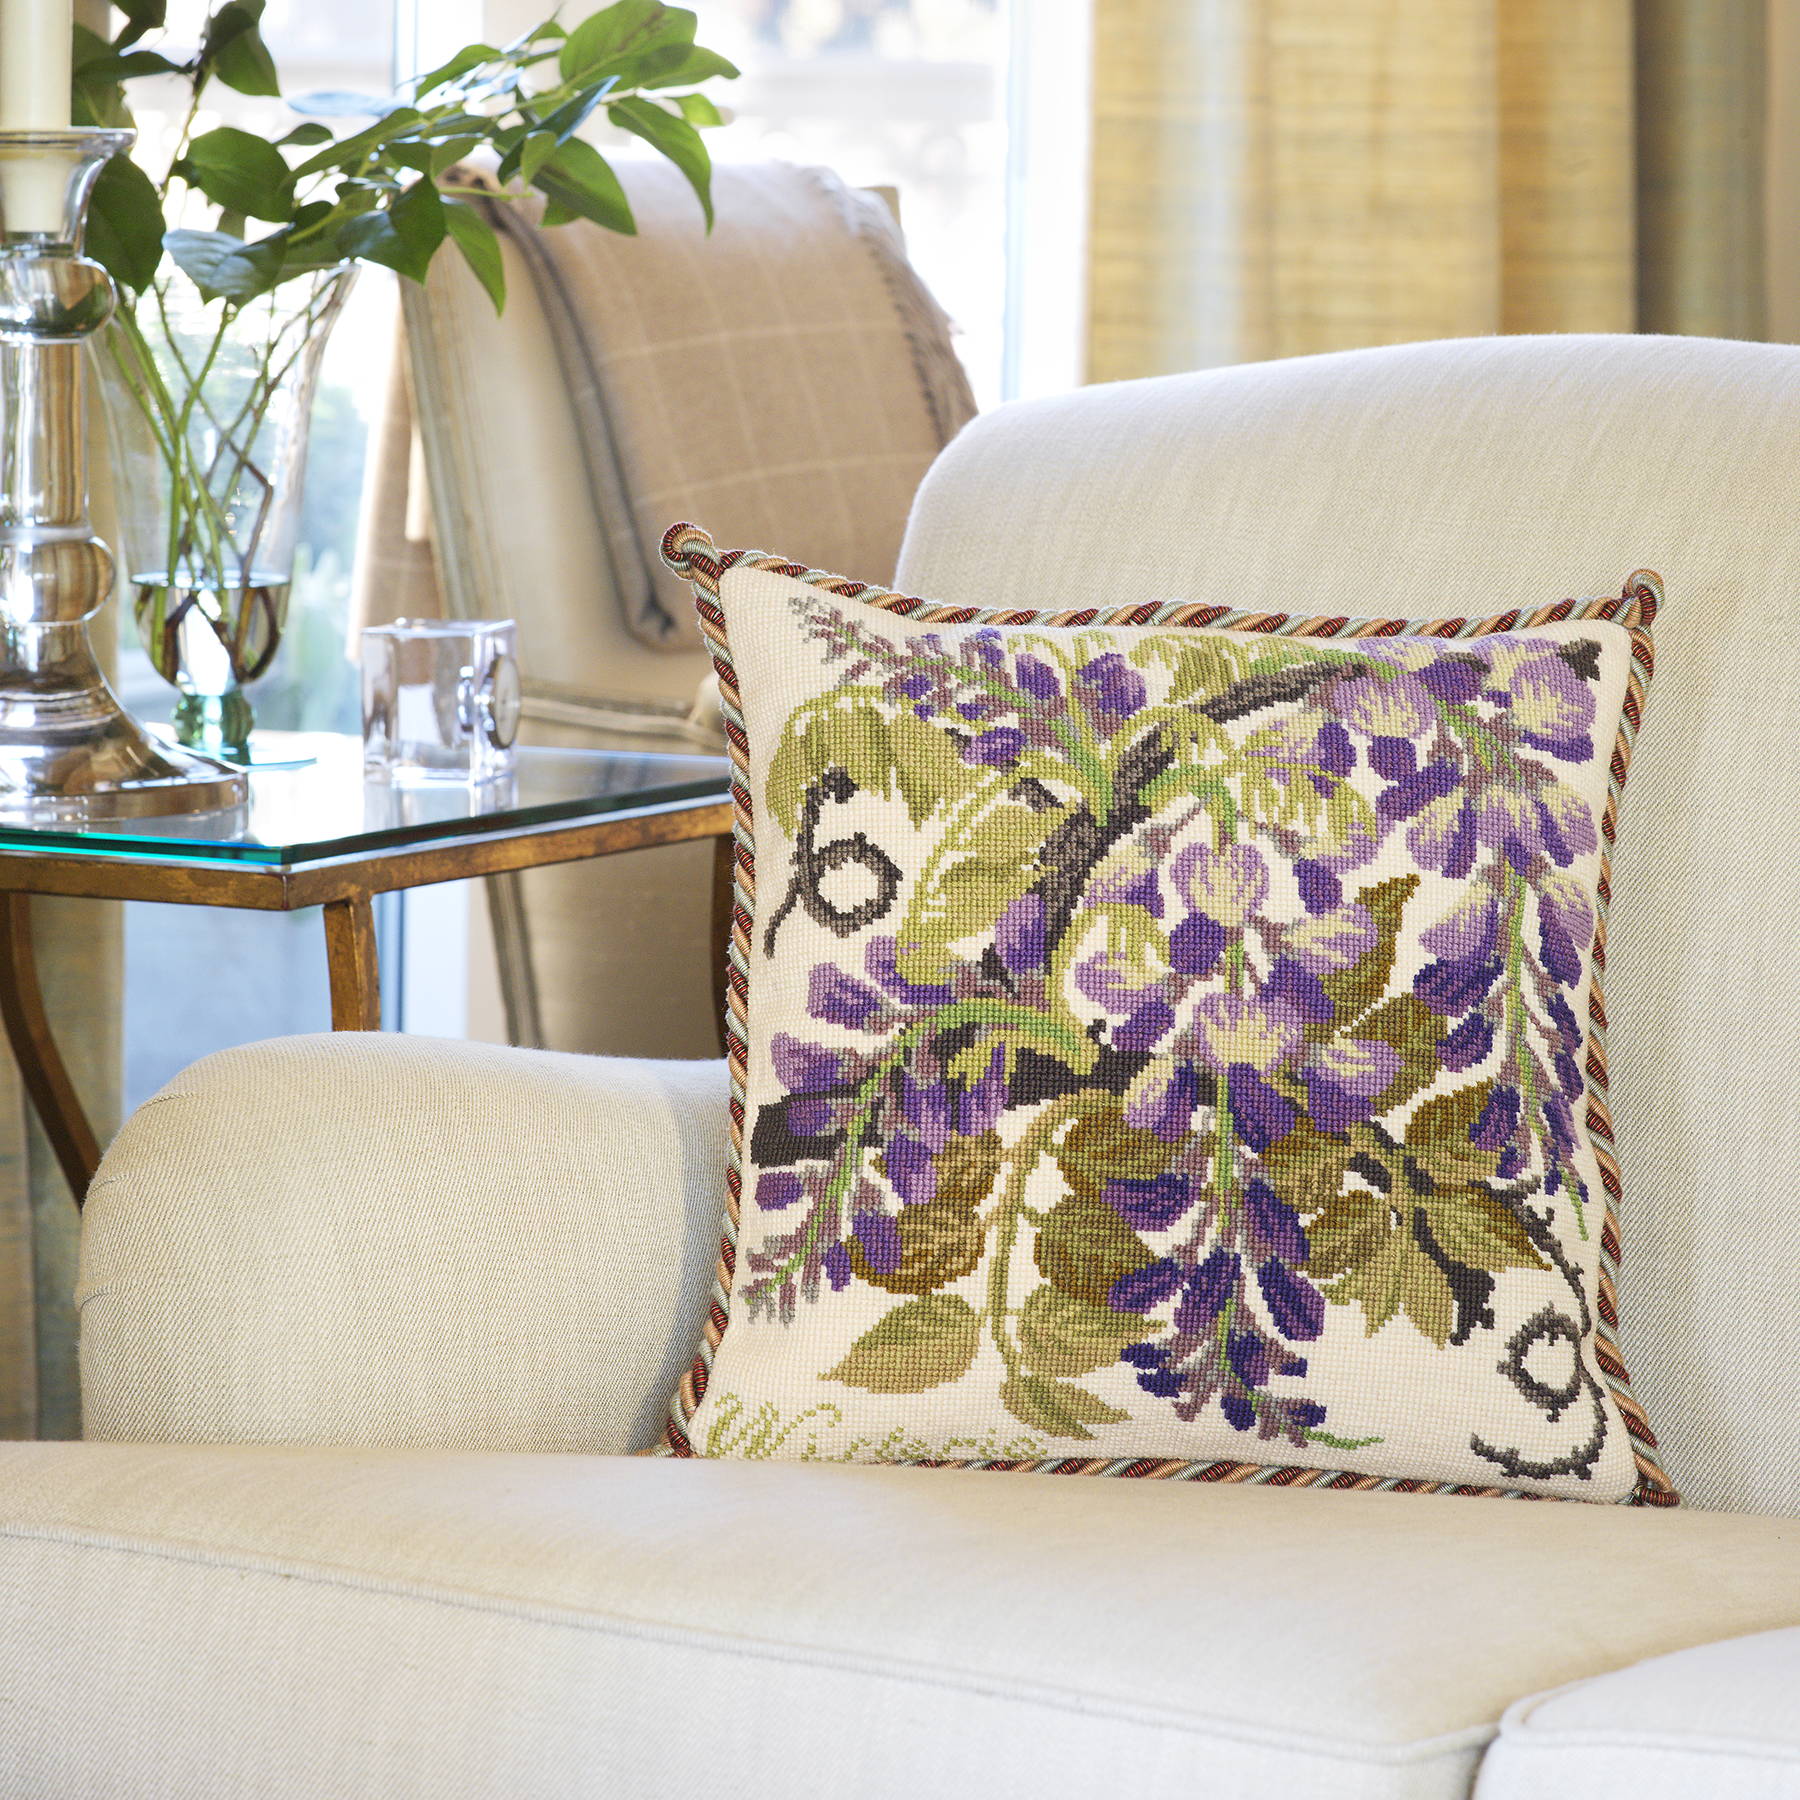 Wisteria finished cushion on cream chair